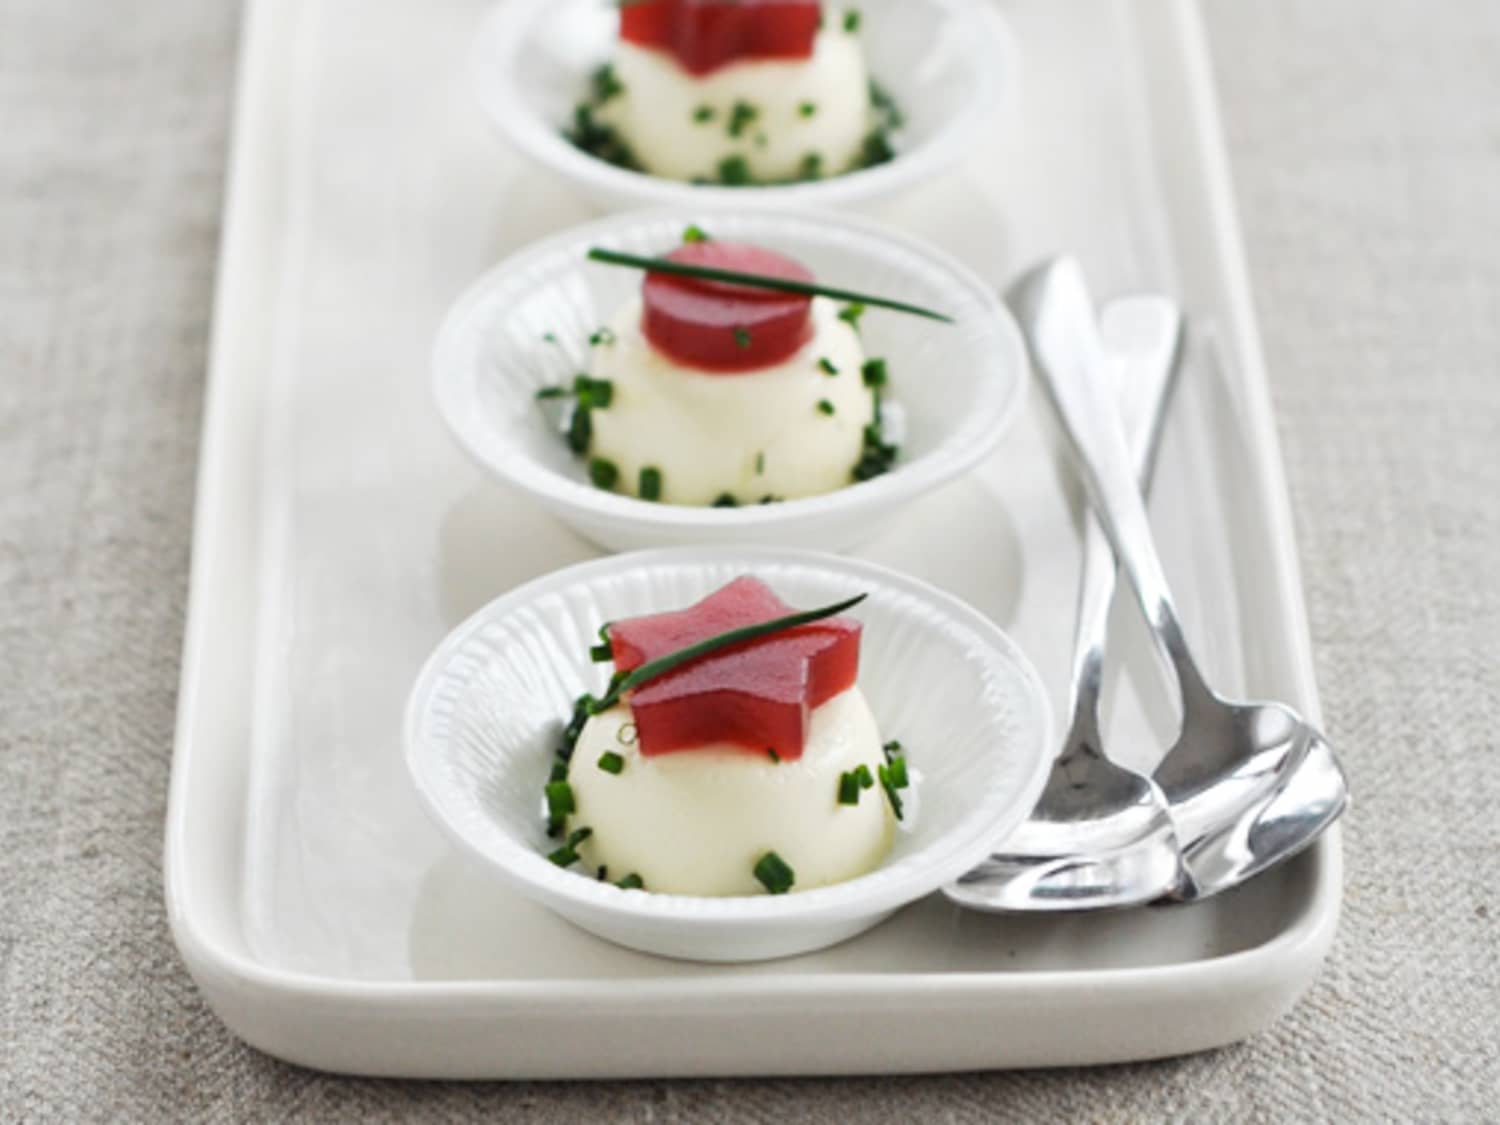 Koning Lear Rijpen scherp Thanksgiving Amuse-Bouche: Savory Goat Cheese Panna Cotta with Canned  Cranberry Jelly Cut-Outs | Kitchn